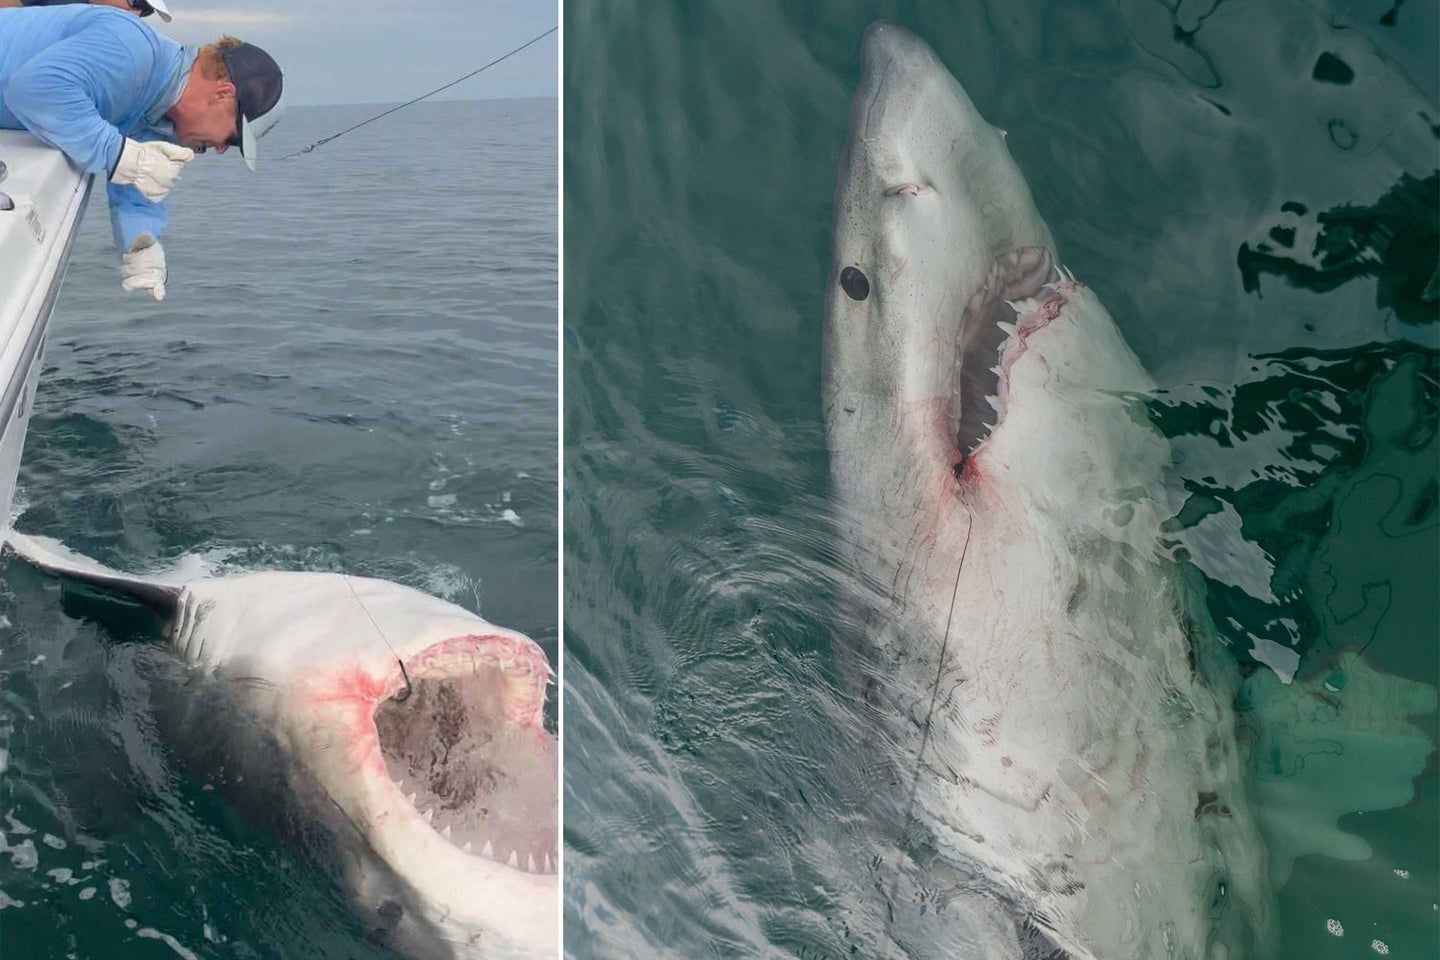 Anglers' Massive Great White Shark Weighed Nearly 3,000 Pounds